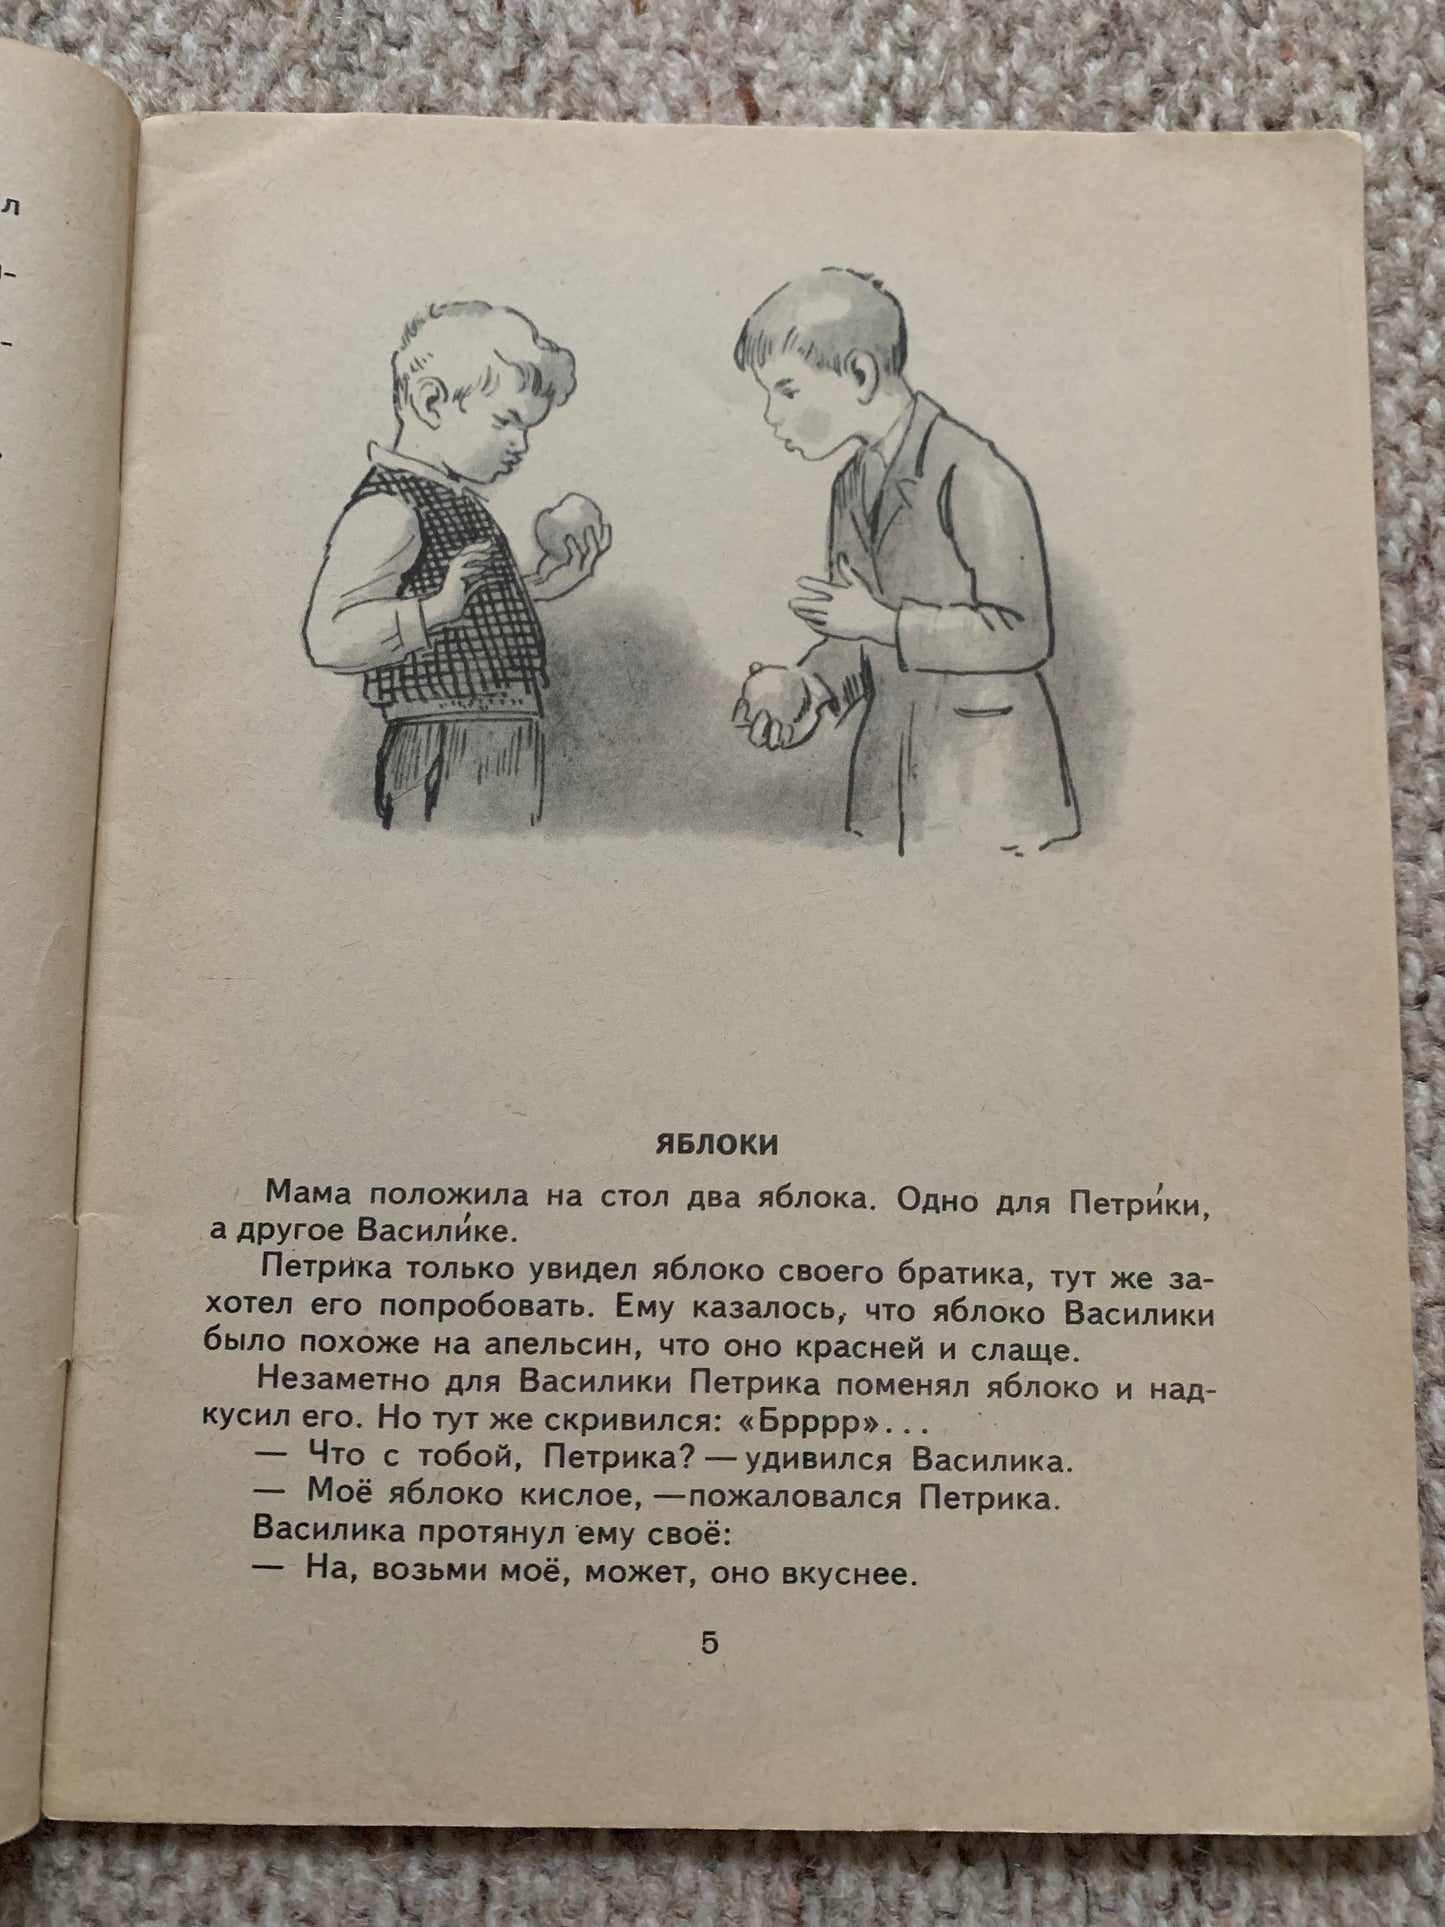 Vintage Russian Children's Book by M.Zoref - SEVEN AND SEVEN MAKES TWELVE - Stories - Printed in USSR - 1968